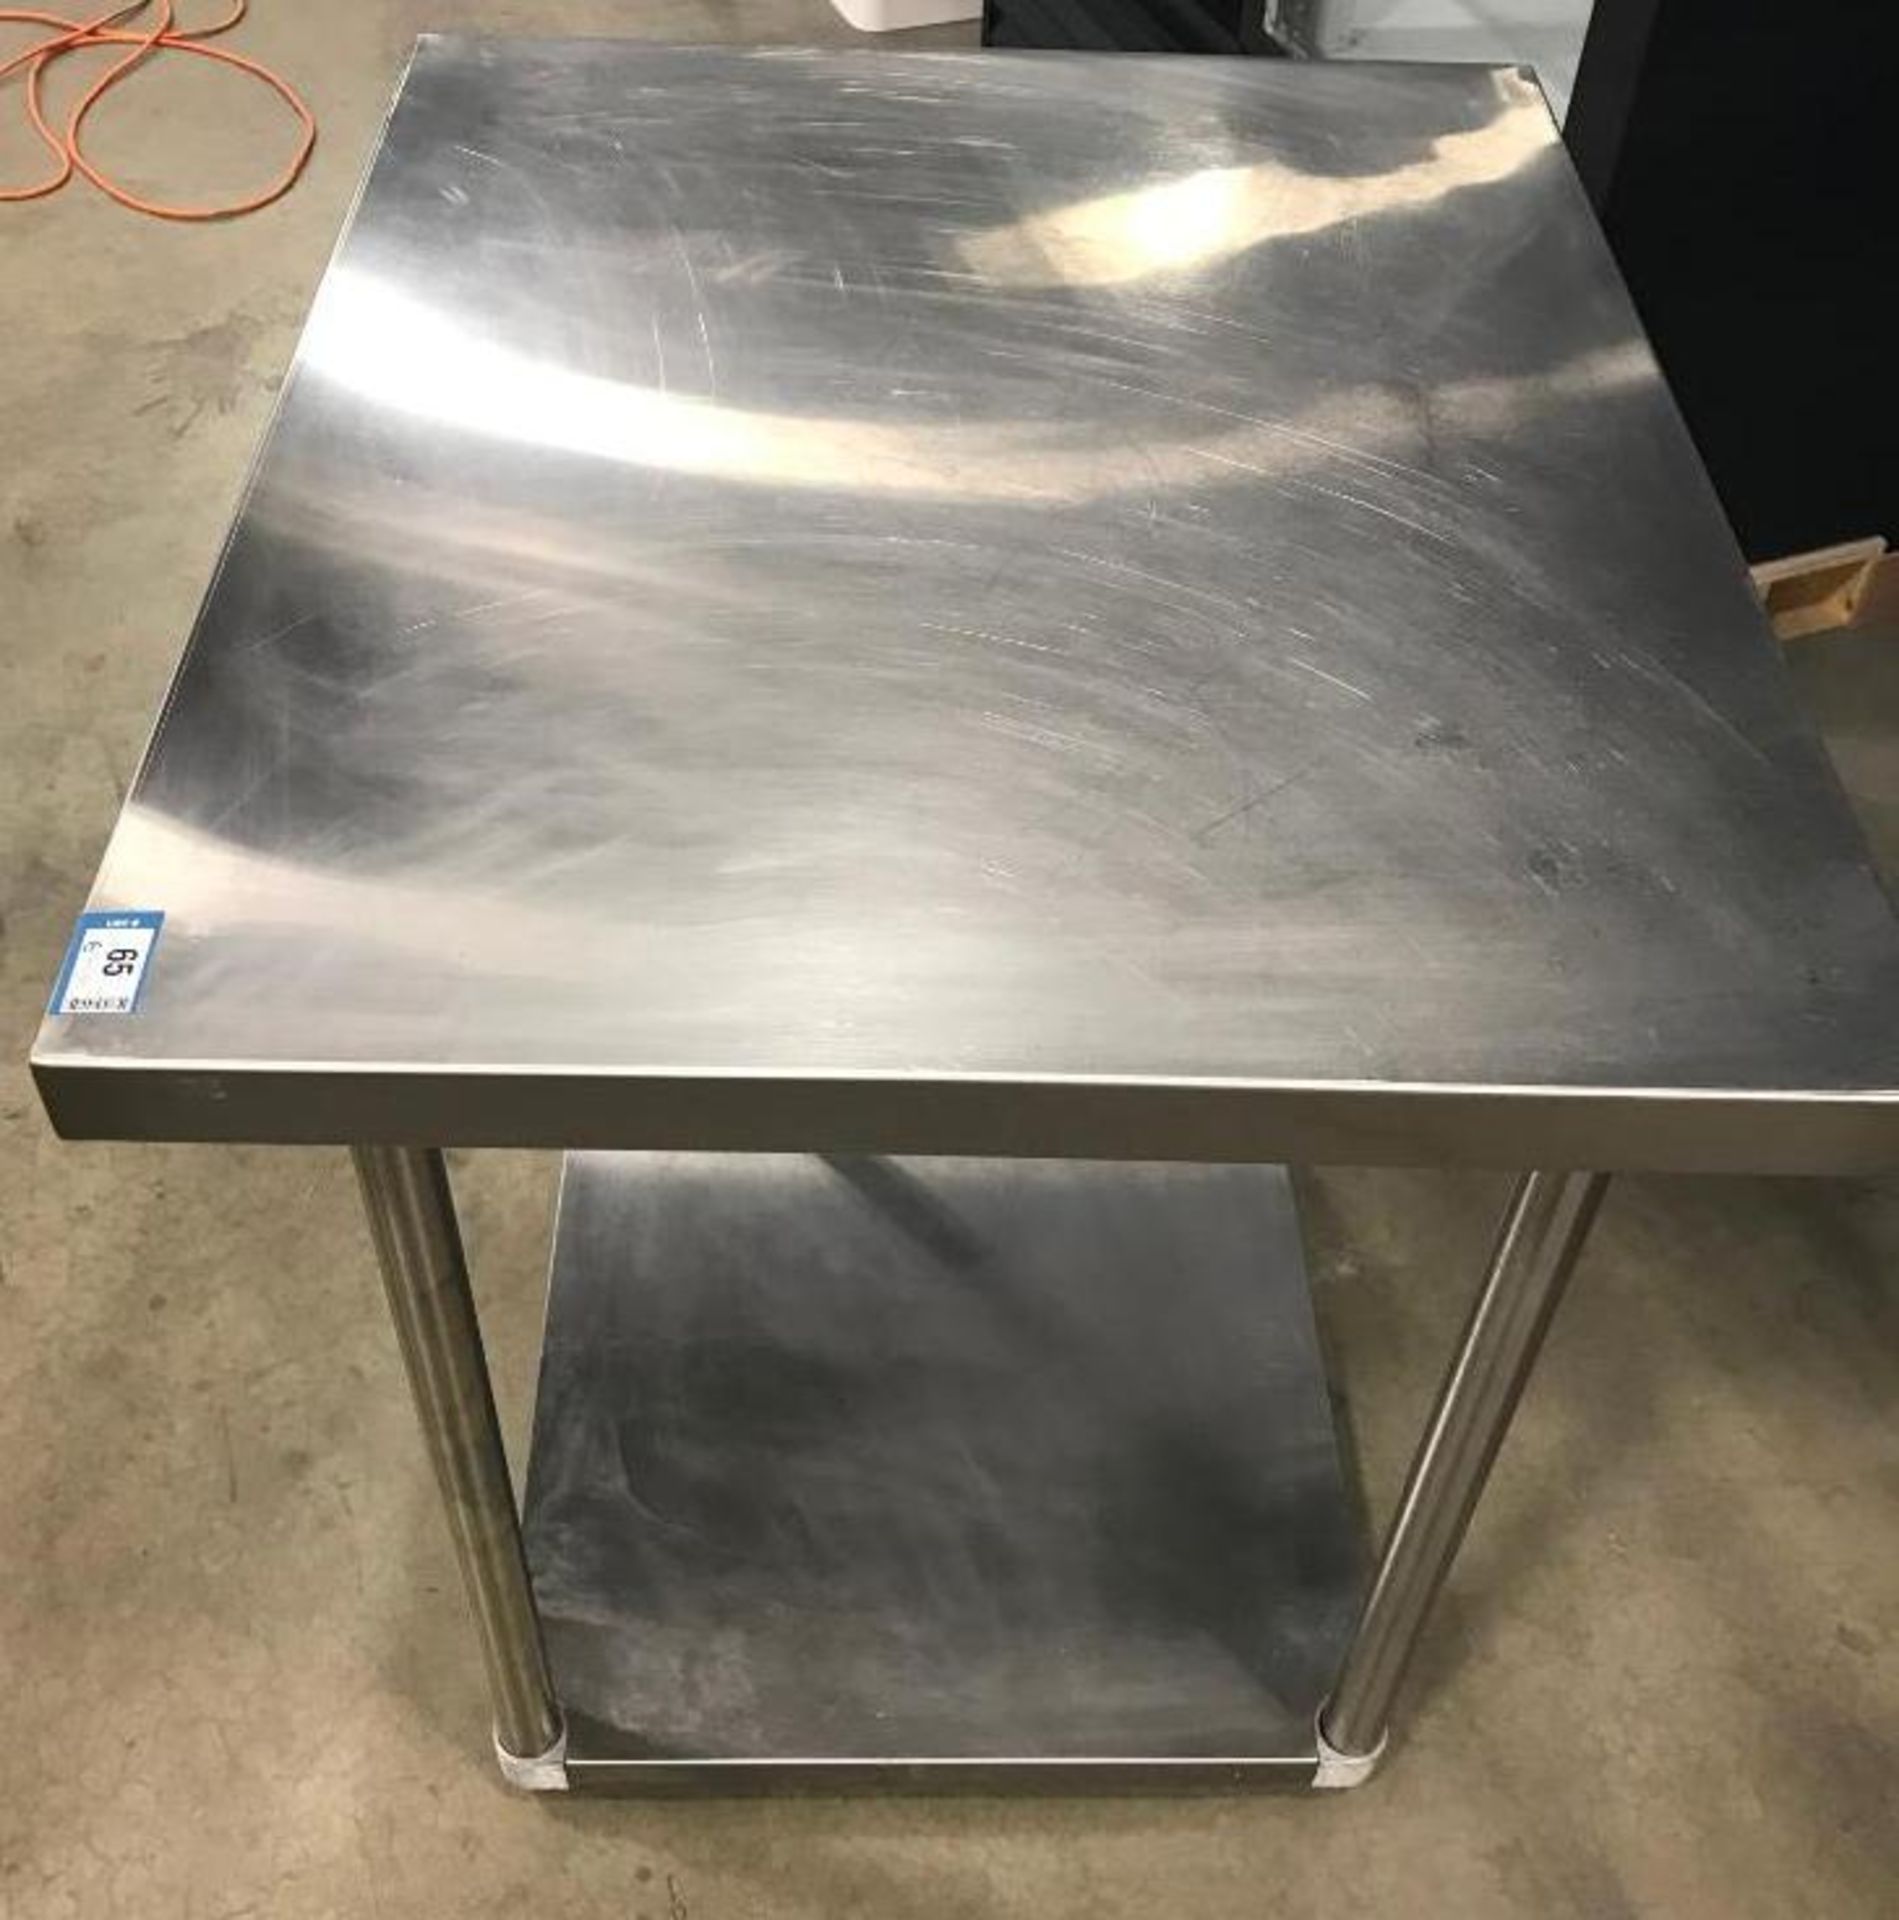 EFI 30" X 36" STAINLESS STEEL WORK TABLE WITH UNDERSHELF, EFI TS3036 - Image 2 of 4